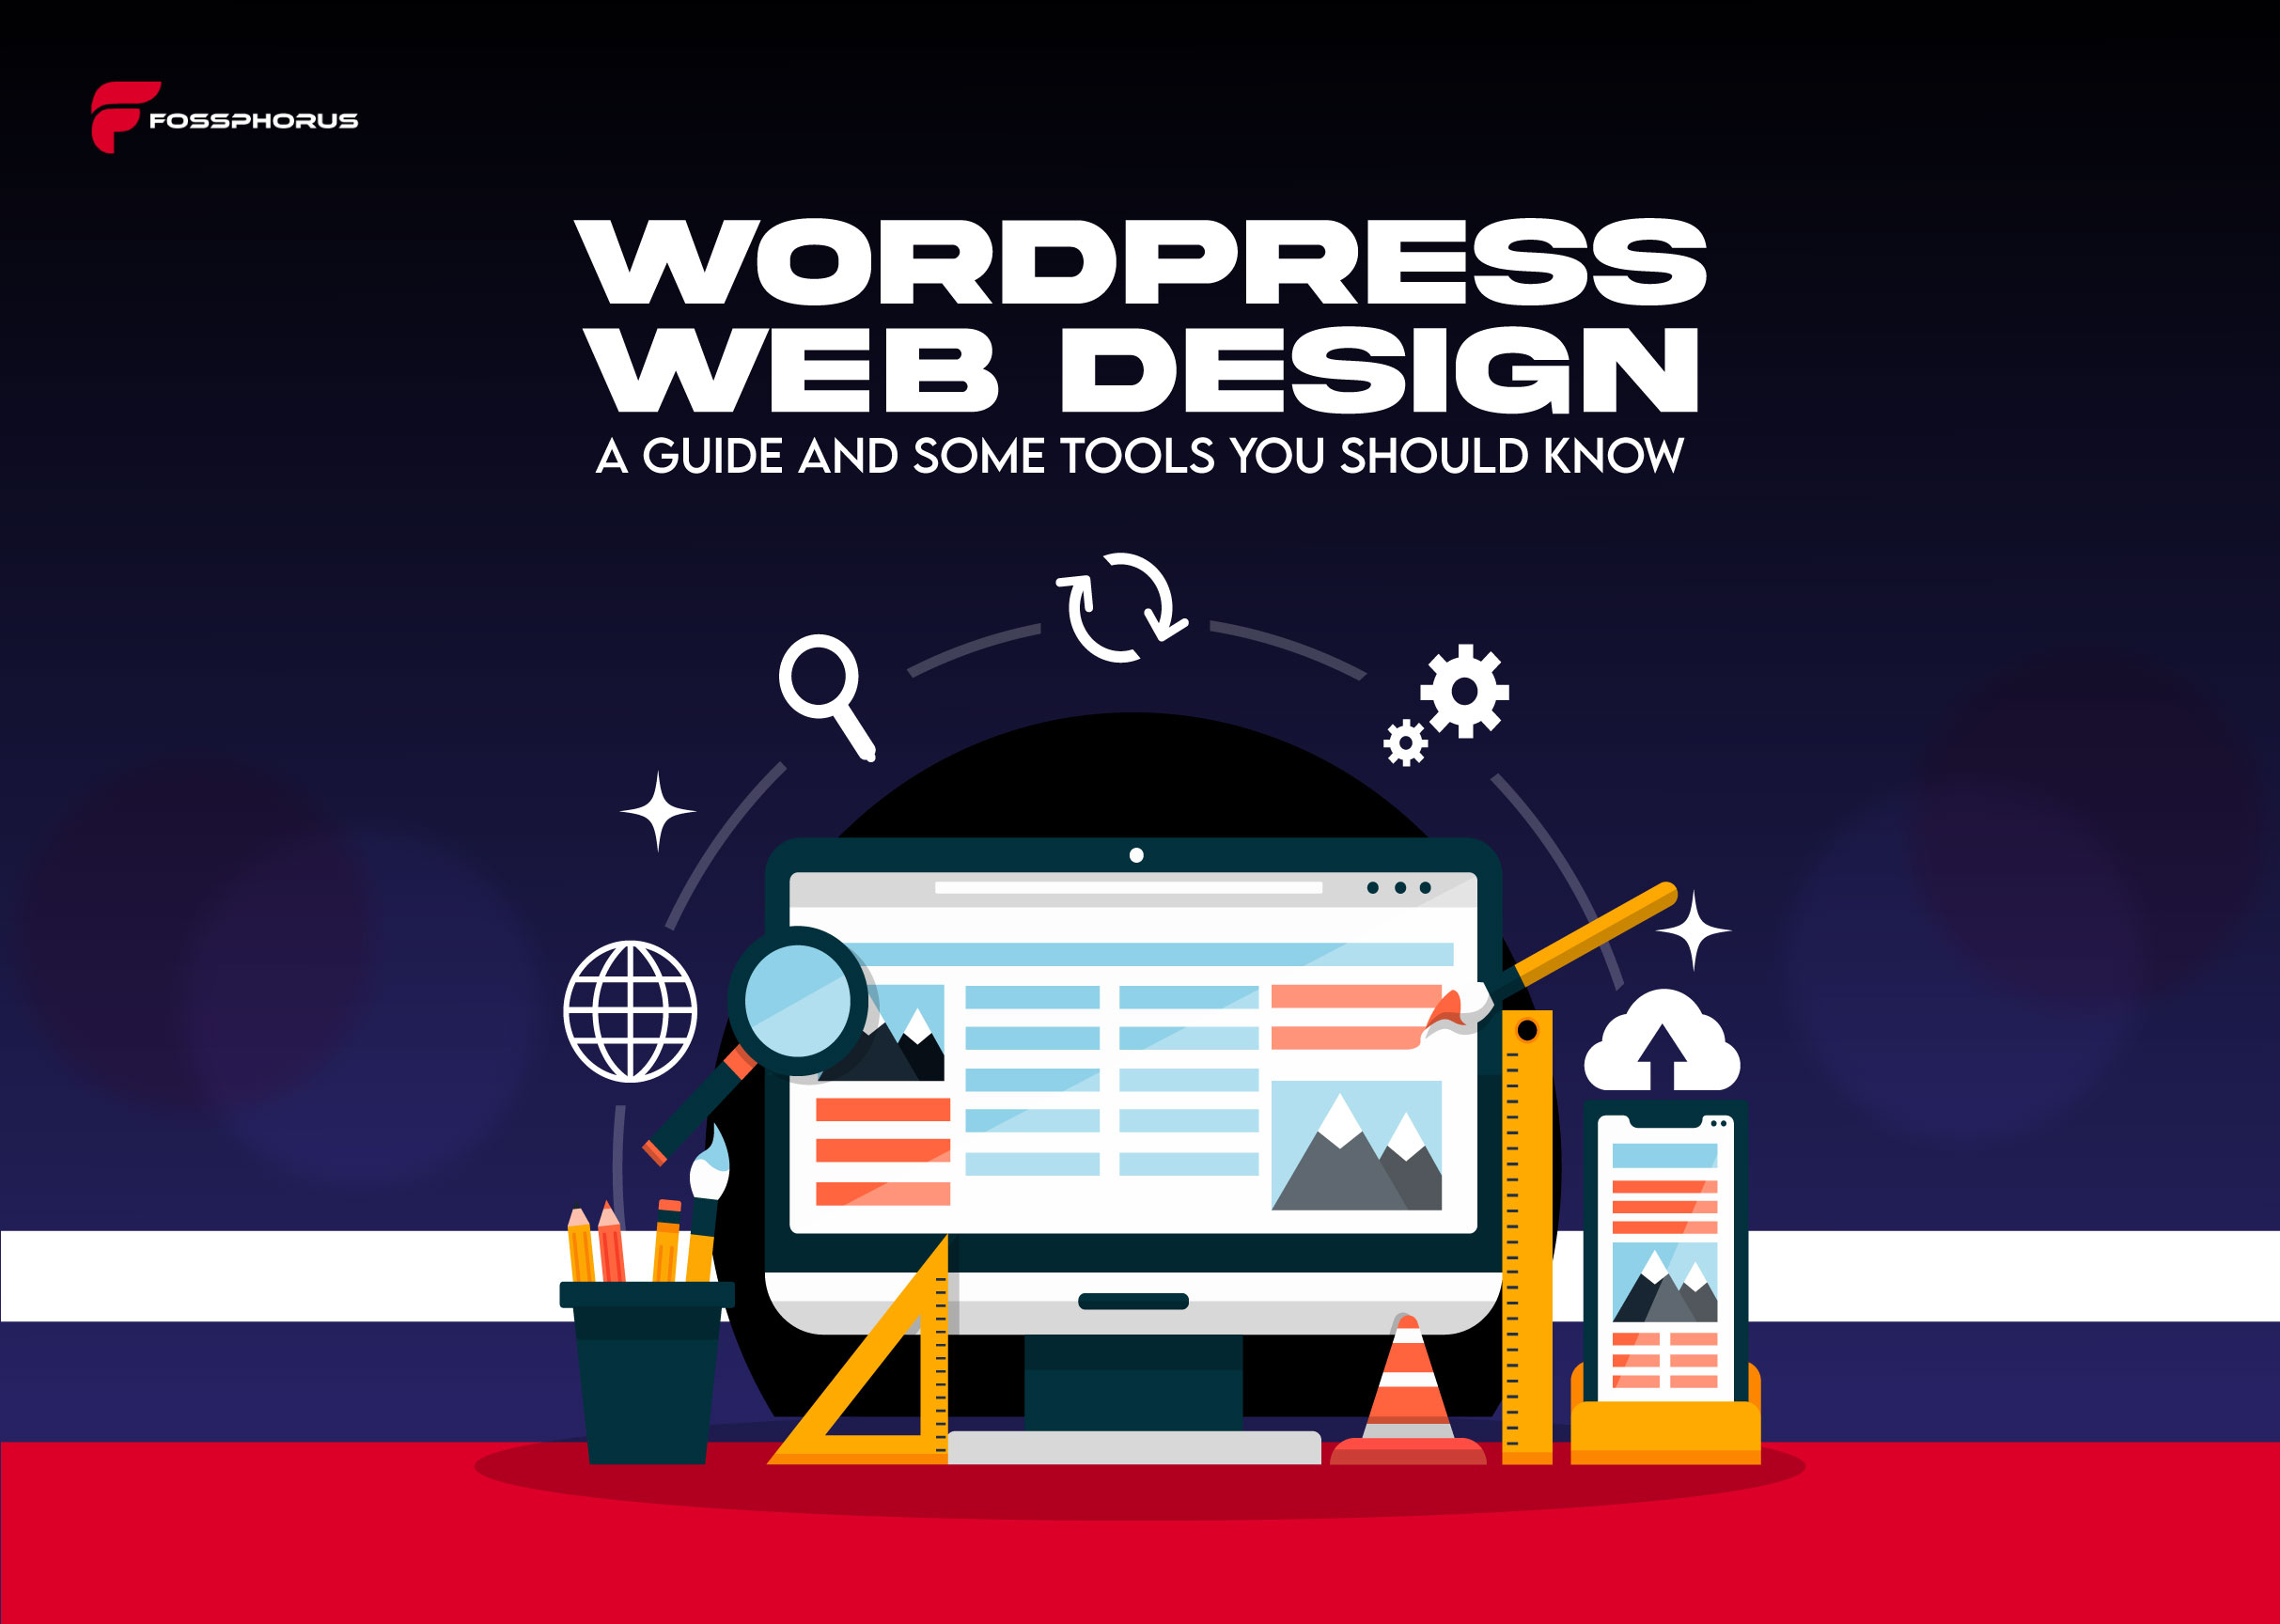 WordPress-Web-Design-A-Guide-and-Some-Tools-You-Should-Know